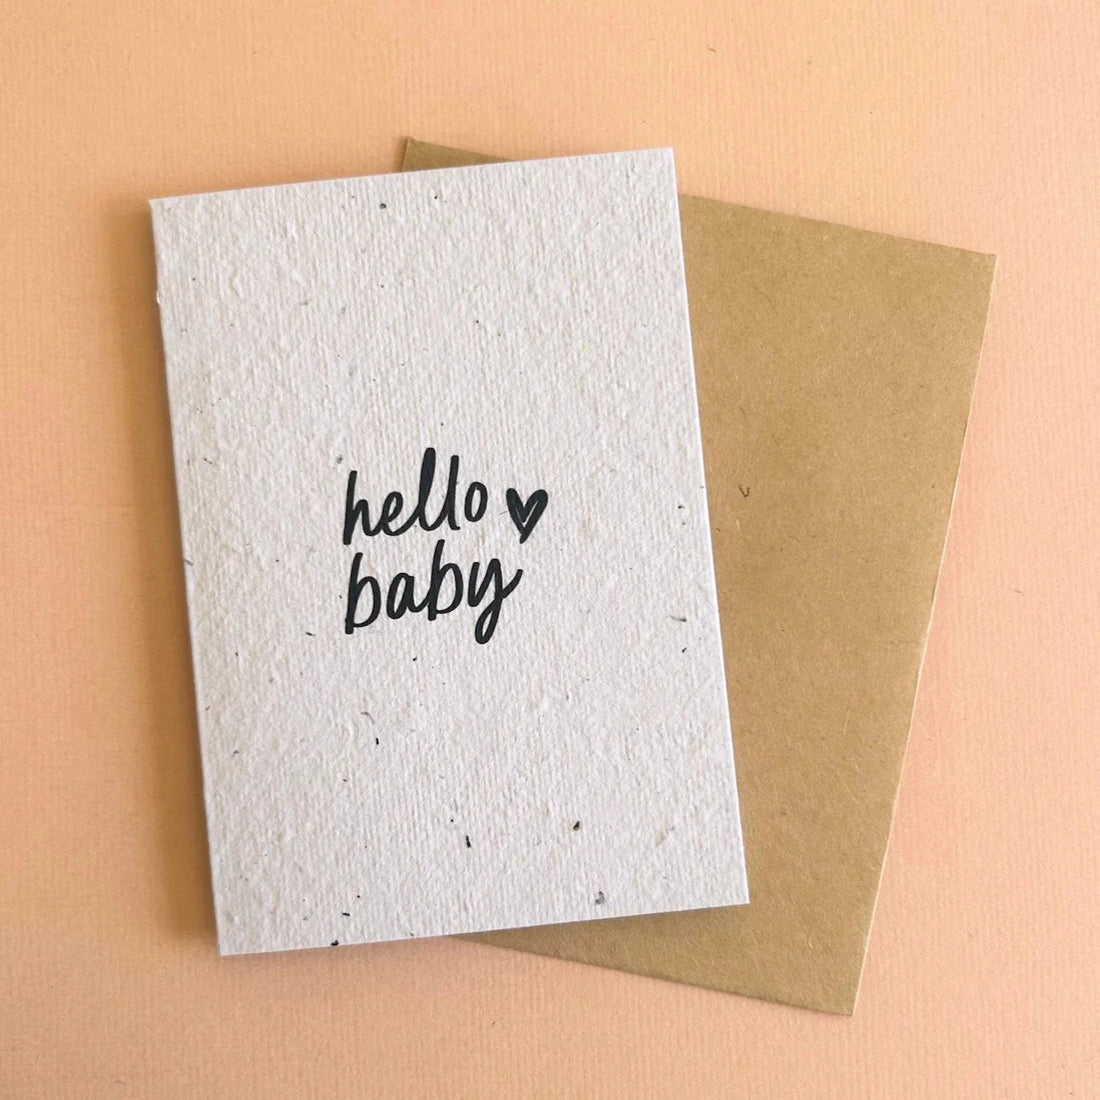 Seeded Plantable Greeting Card by Hello Petal - Hello Baby  🌸